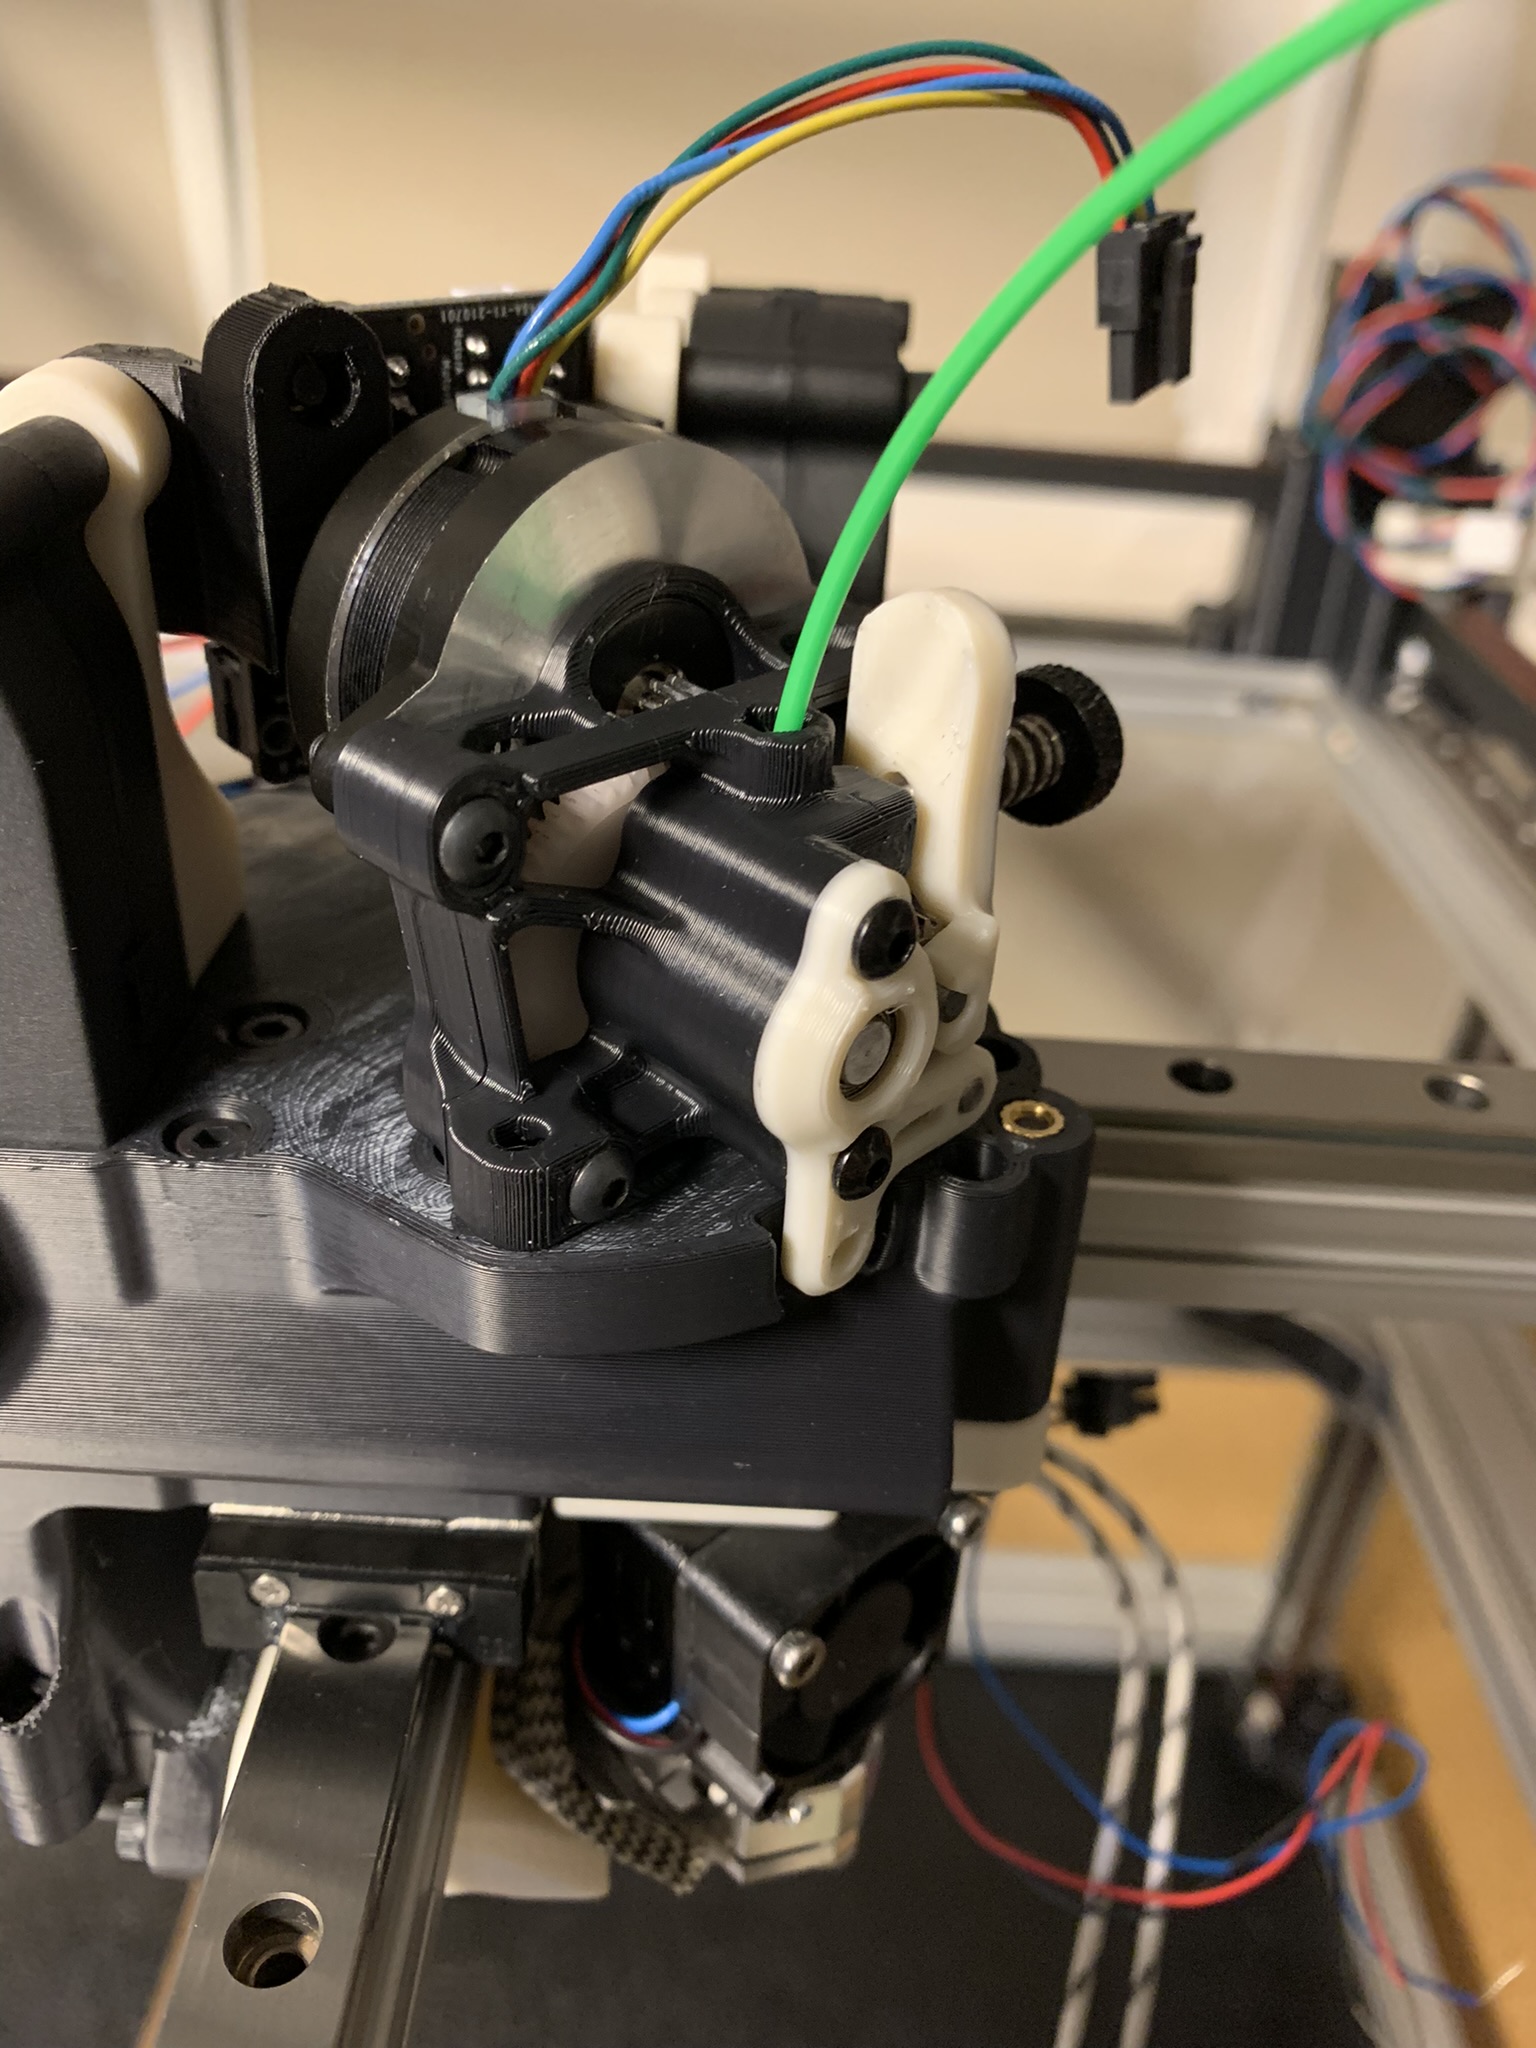 Filament fed into the extruder and toolhead